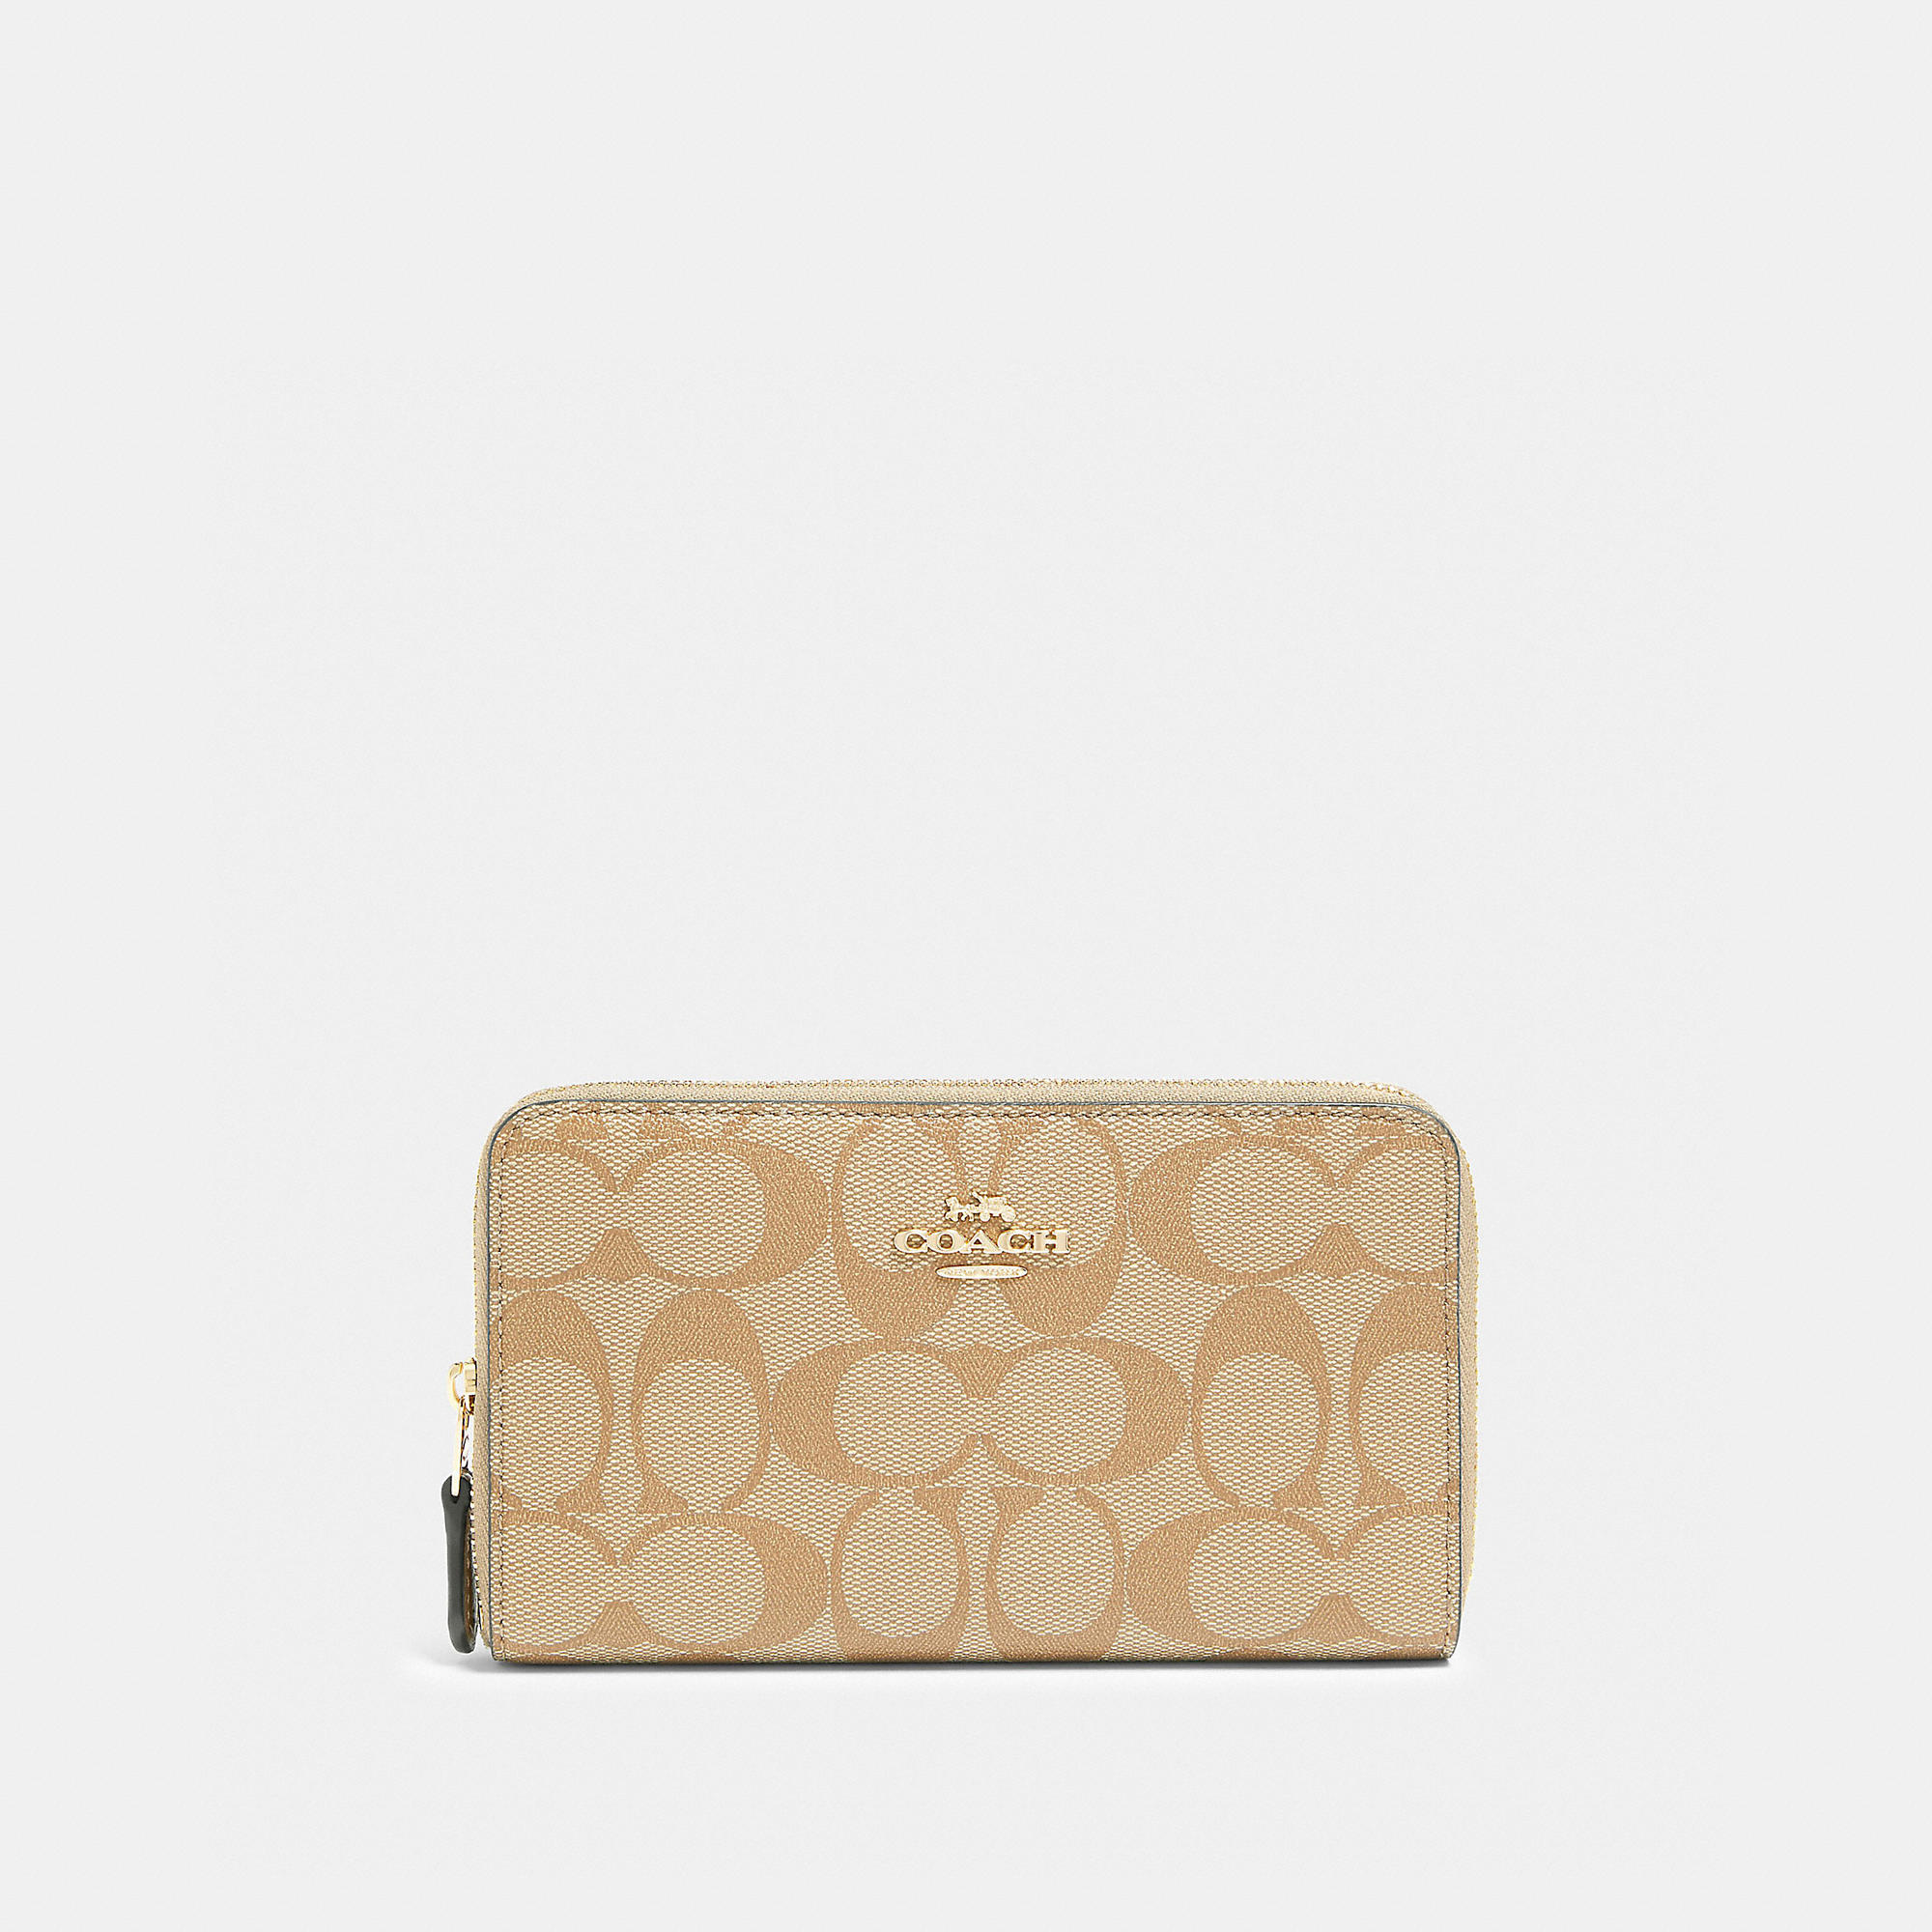 Women's COACH Wallets On Sale, Up To 70% Off | ModeSens